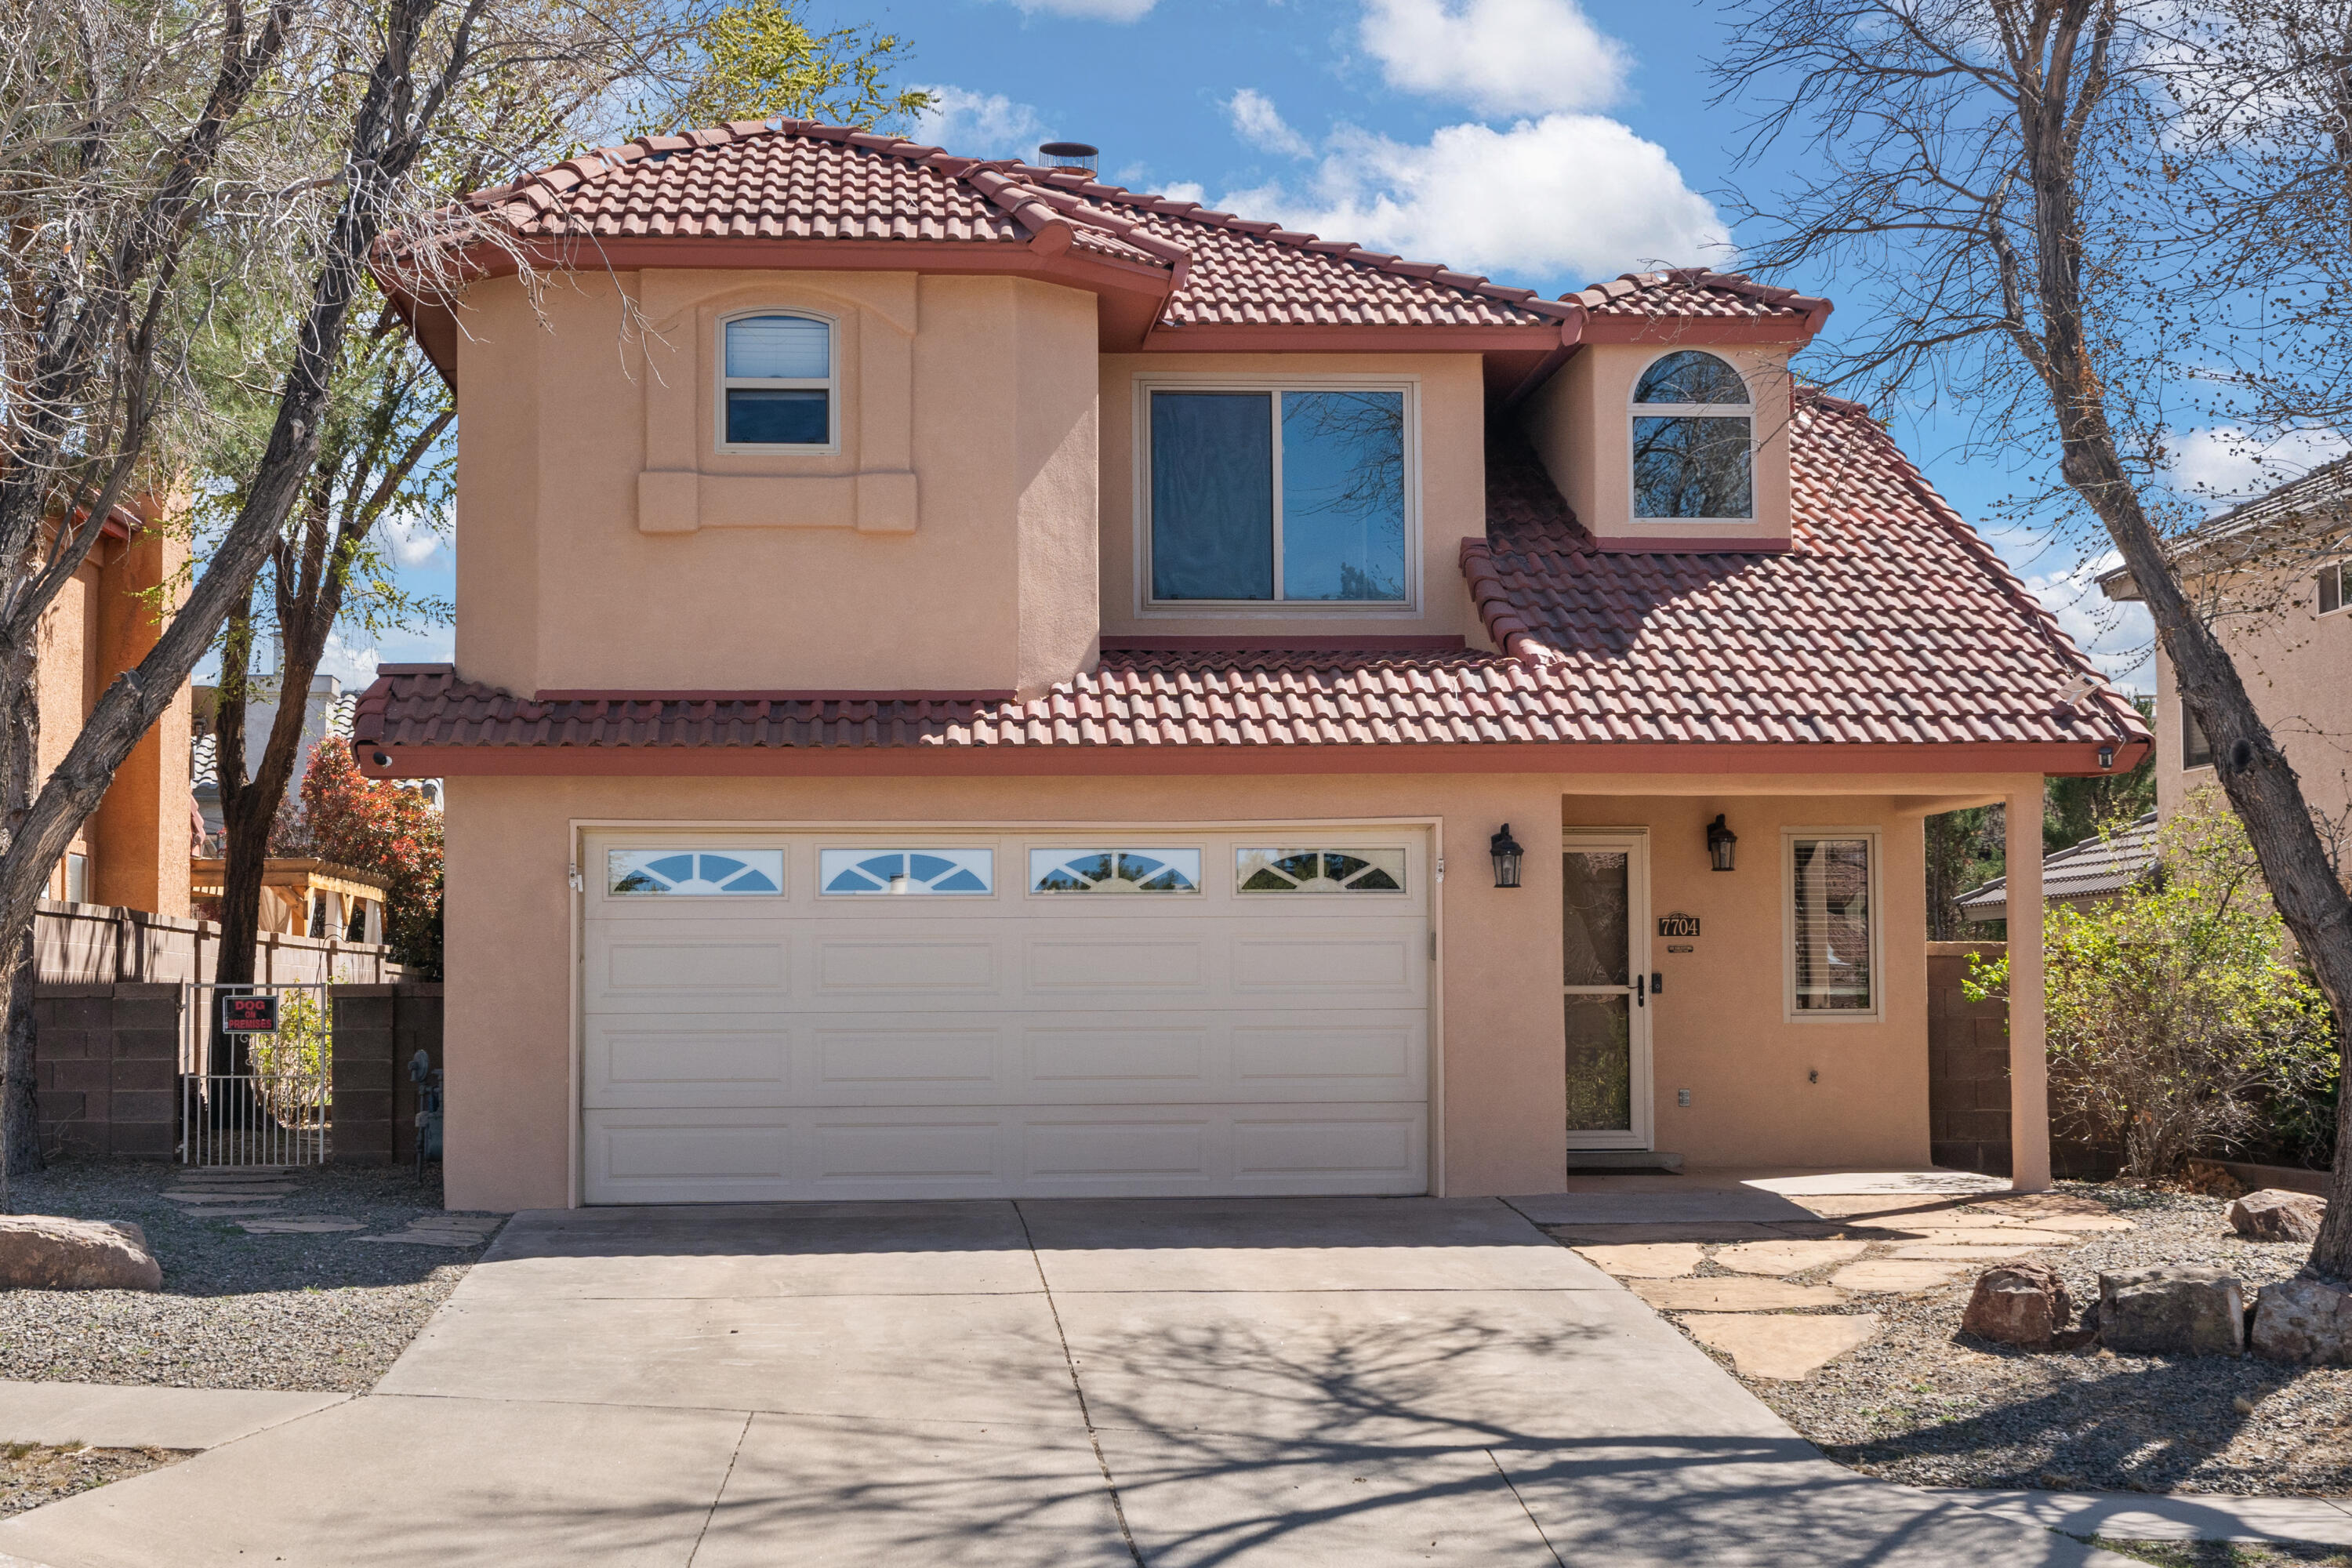 Welcome to this beautiful home located in the highly sought after La Cueva school district. This 2-story, 4-bed, 3-bath gem boasts a spacious 2-car garage, comfortable living area with plenty of natural light. Kitchen; maple cabinets, tile counters and plenty of cabinets! NEW roof (11/2022), New stucco (9/2022), NEW (BreezeAir) evaporative cooler (08/2023), New carpets (3/12/2024) . Both showers have been remodeled. Great area! Location Location! Schedule a showing today!